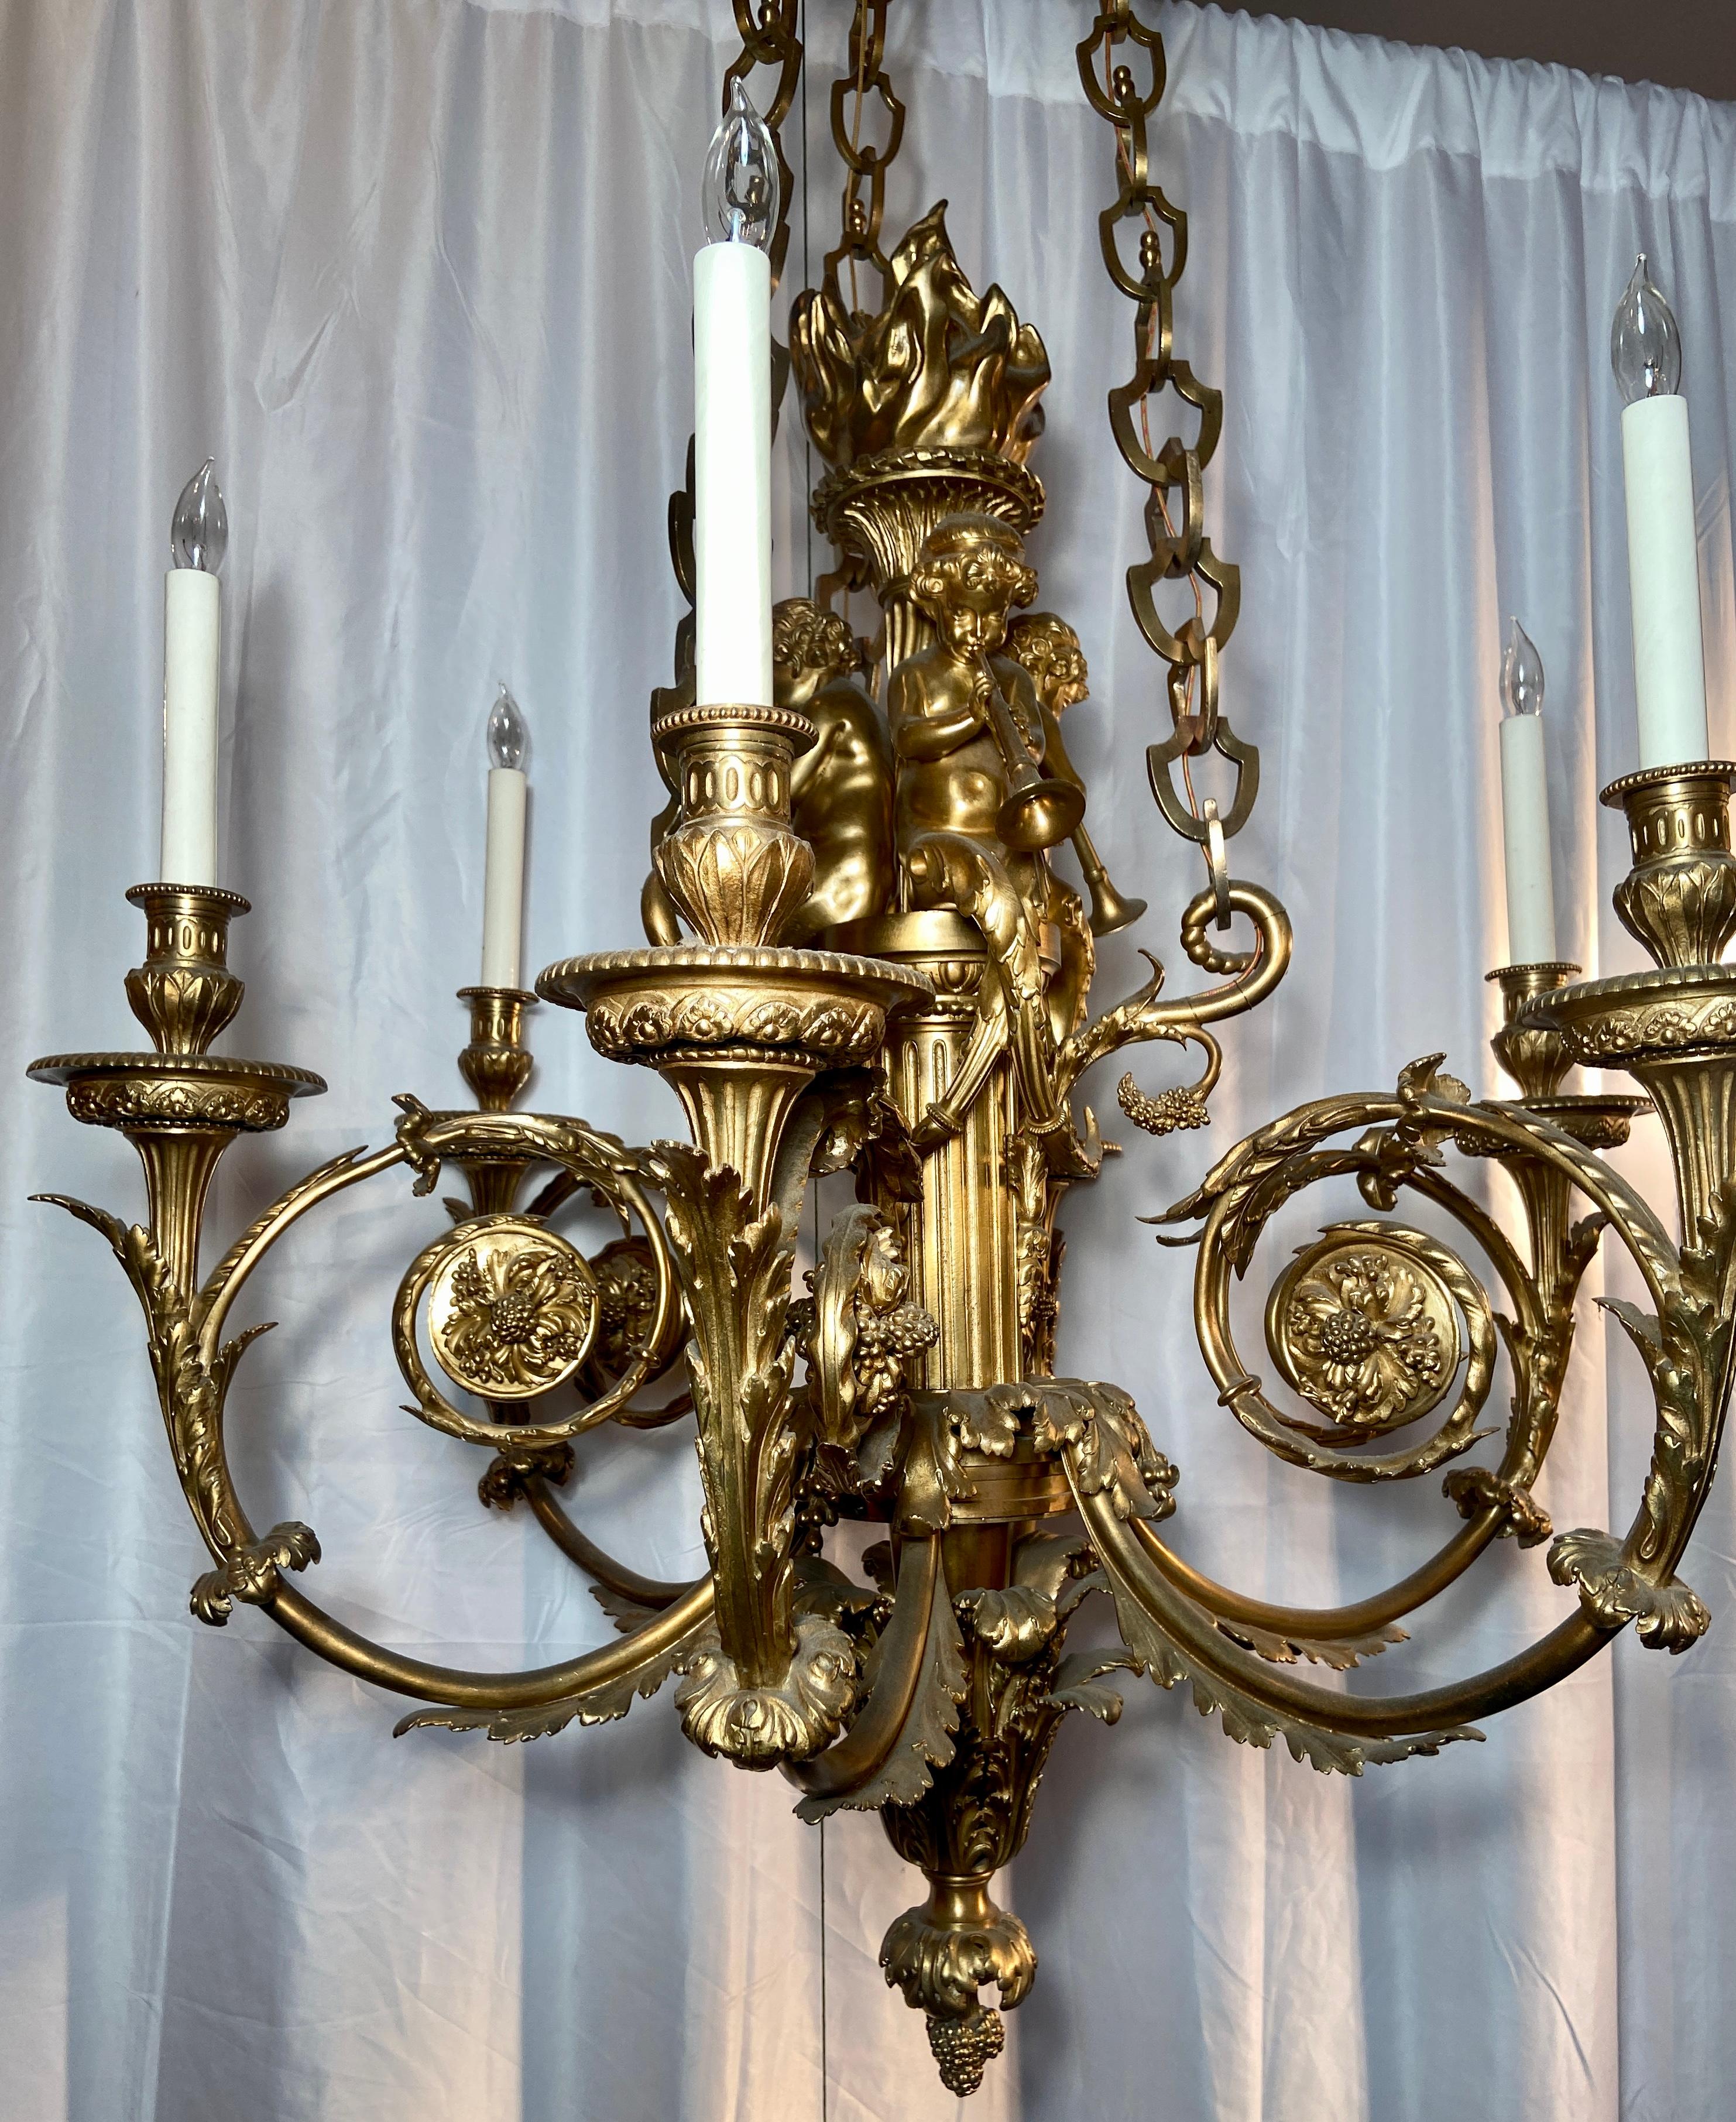 Magnificent antique French bronze D' Ore chandelier, Versailles Model, Circa 1820-1830.
Model from Marie Antoinette's Quarters at The Palace of Versailles, (The Gilded Room).